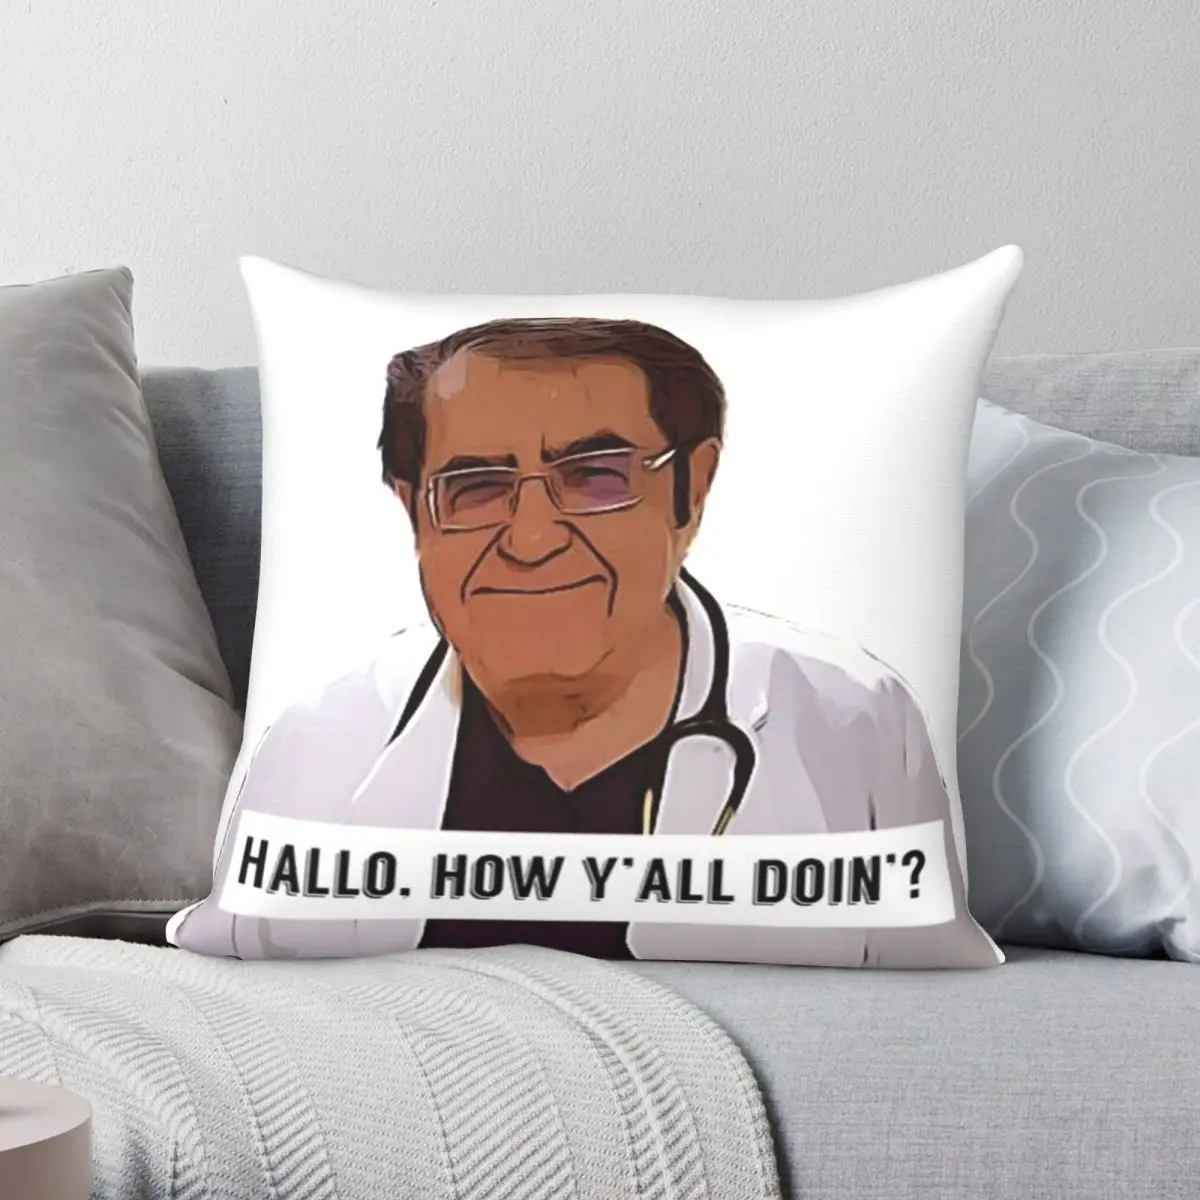 

Dr Now Doctor Now Hallo How Ya All Doing Square Pillowcase Polyester Linen Velvet Zip Decor Throw Pillow Case Bed Cushion Cover